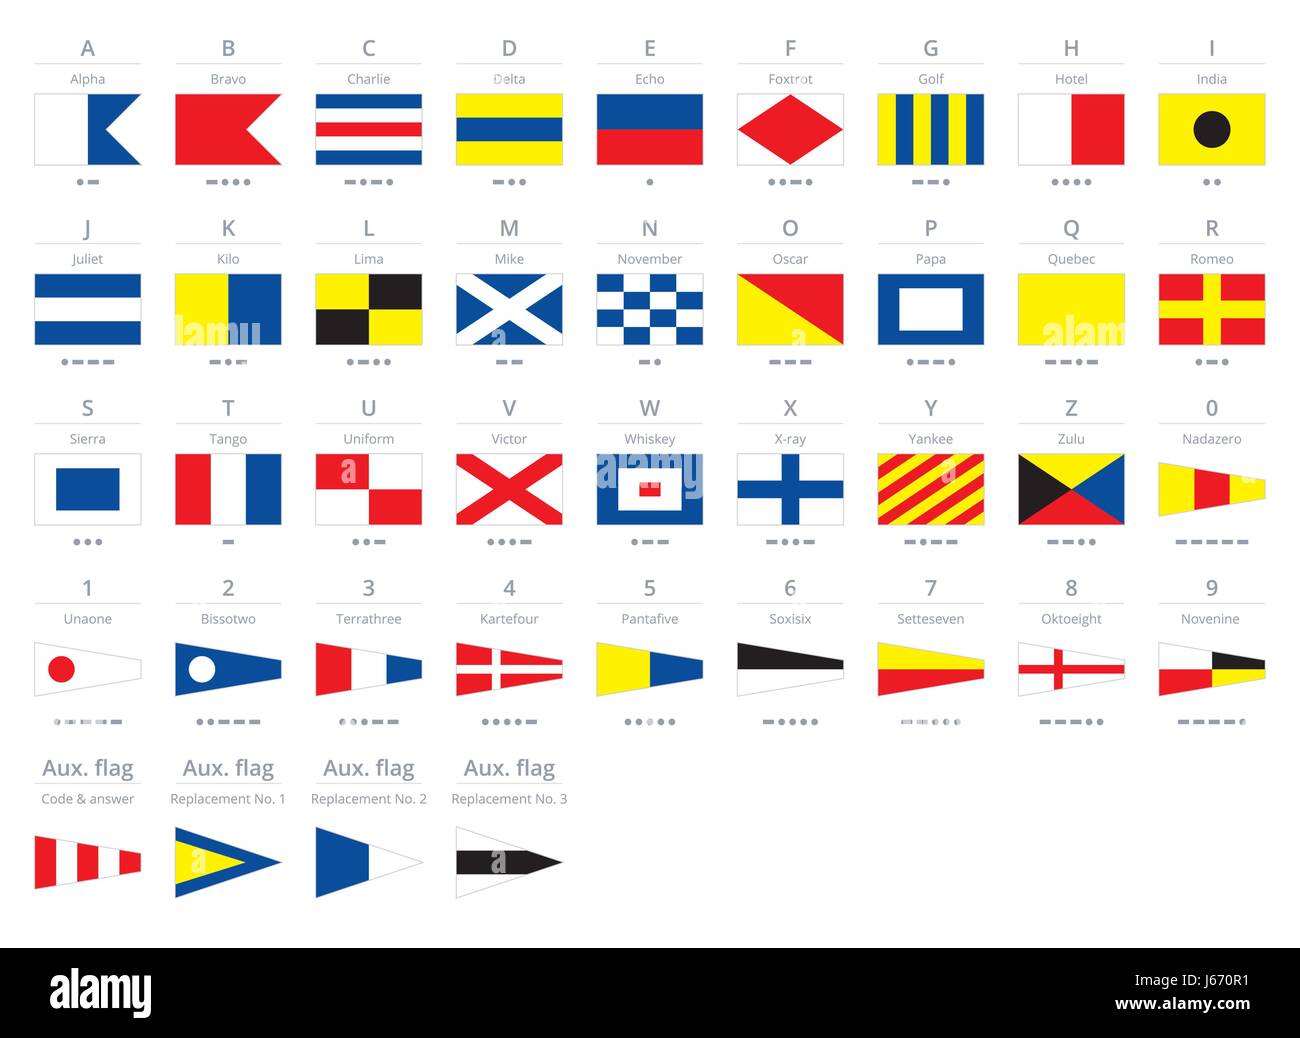 Naval Letter Flags